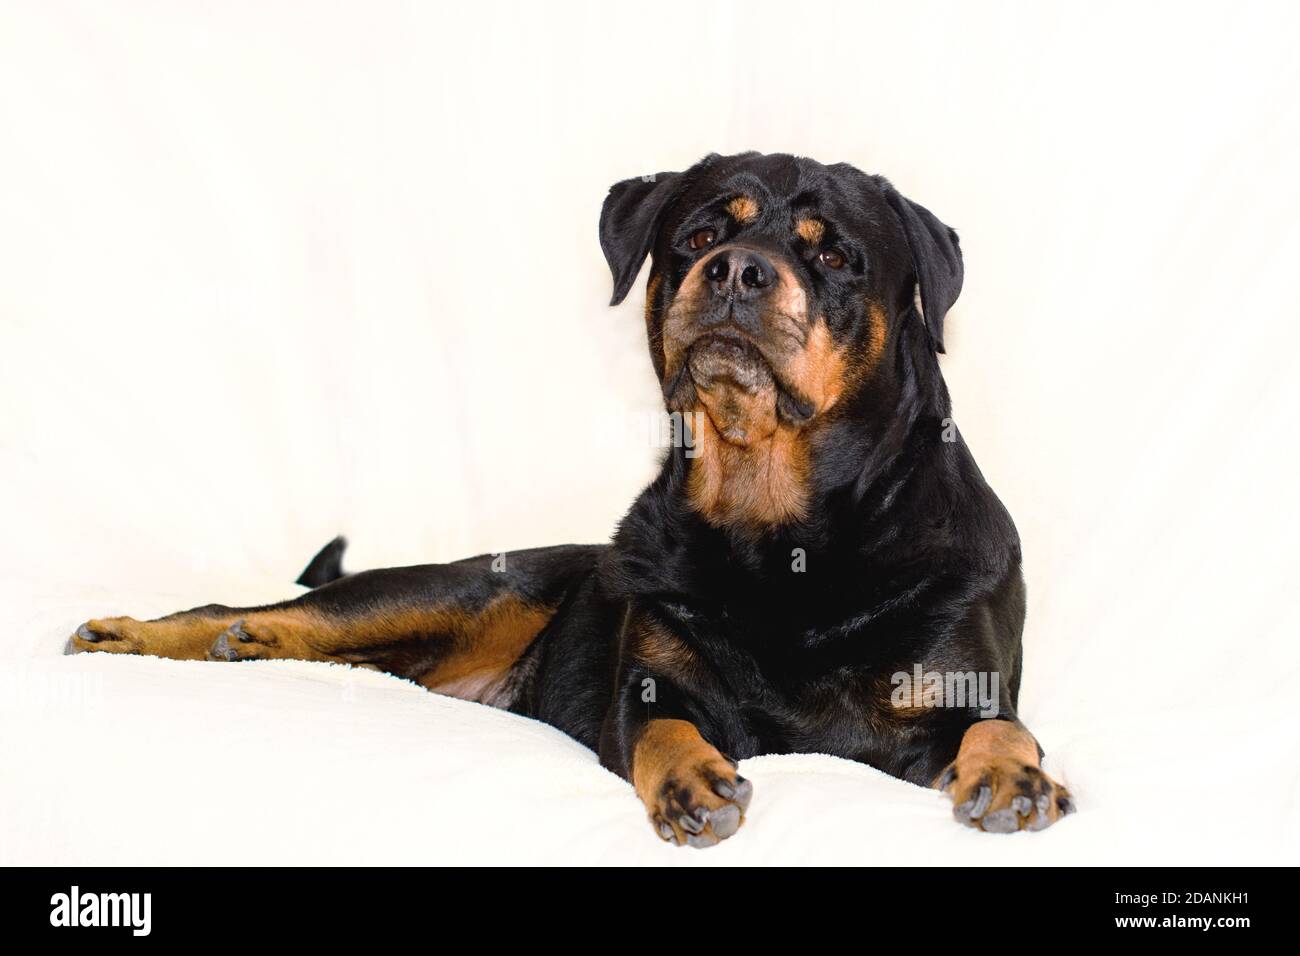 dog breed rottweiler closeup portrait on a light background, concept of protection, solidity, seriousness.Lying down, looks up, Stock Photo